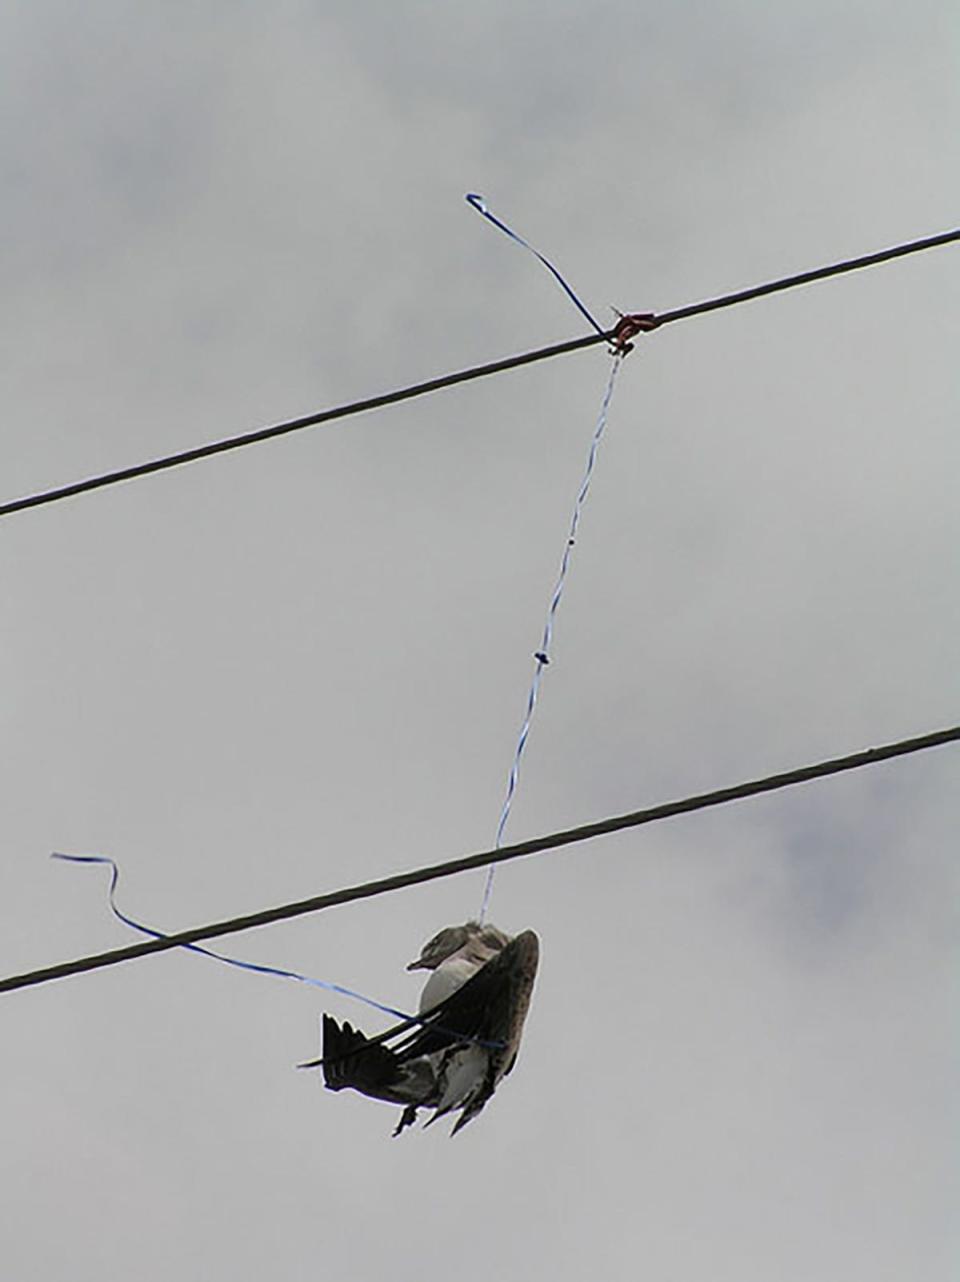 Bird strangled by balloon string connected to powerline